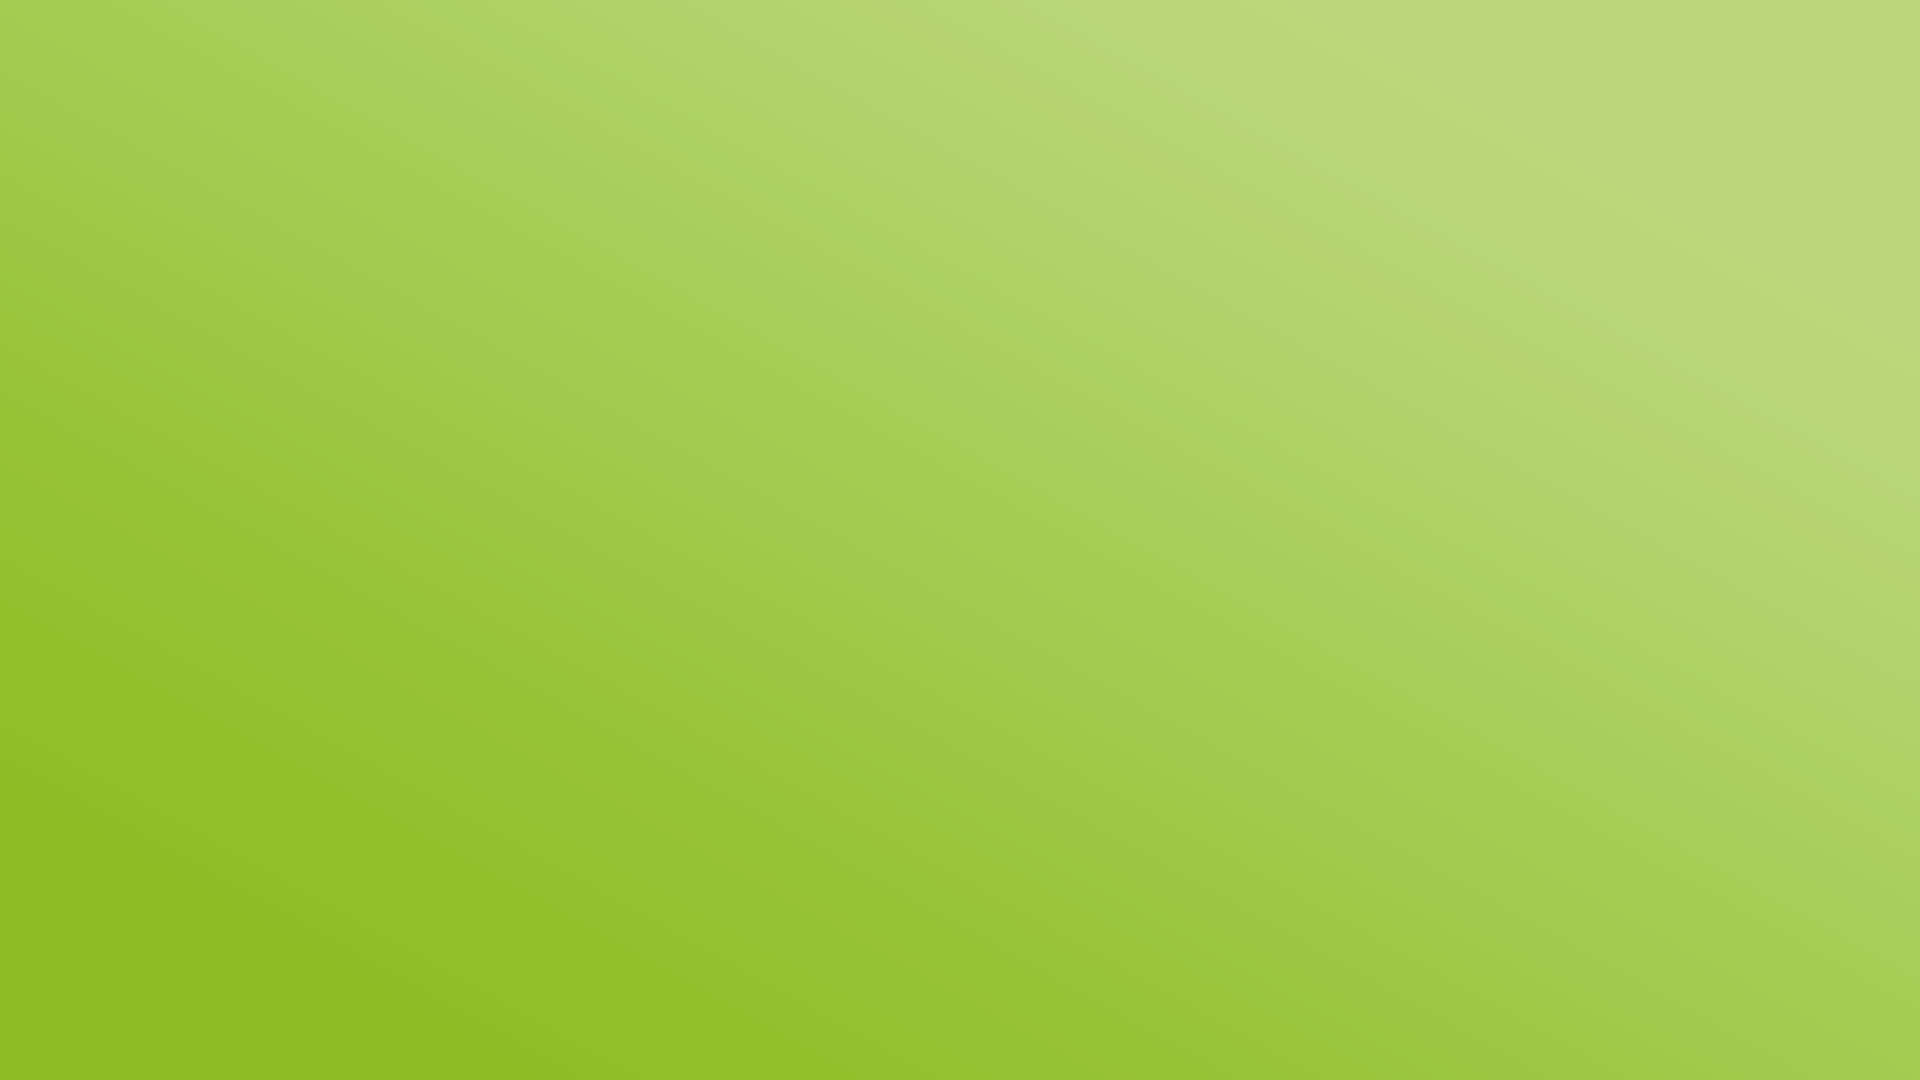 Solid Background Apple Green Ombre Wallpaper